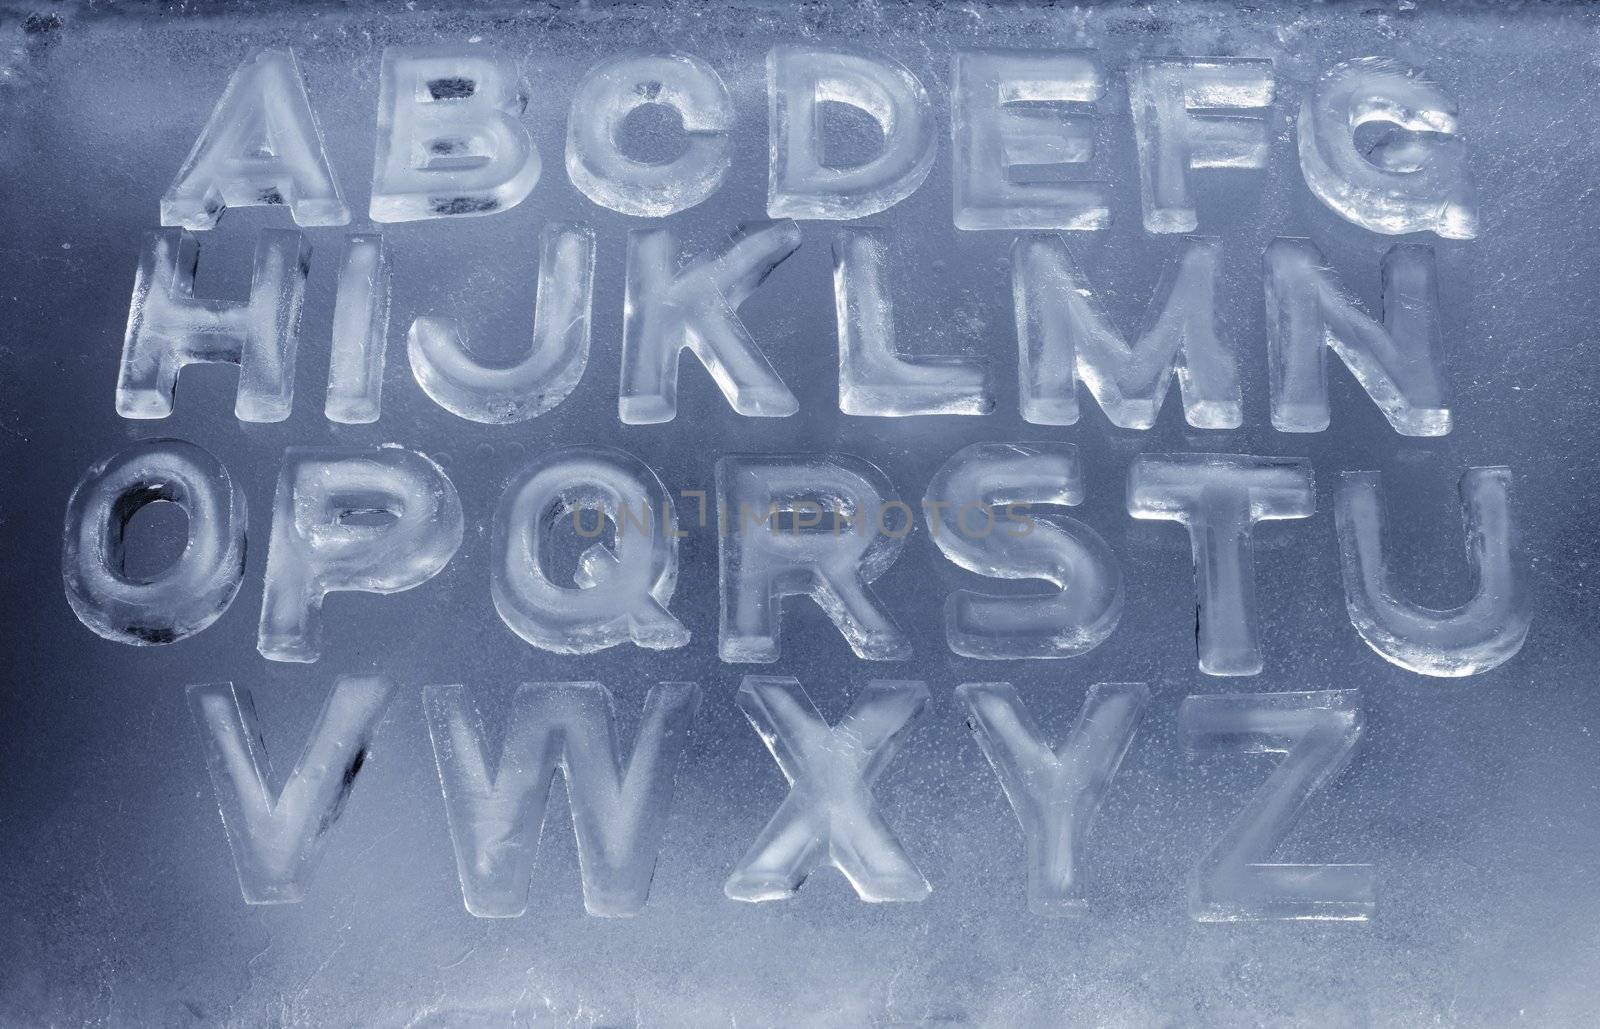 Alphabet made of real ice letters.